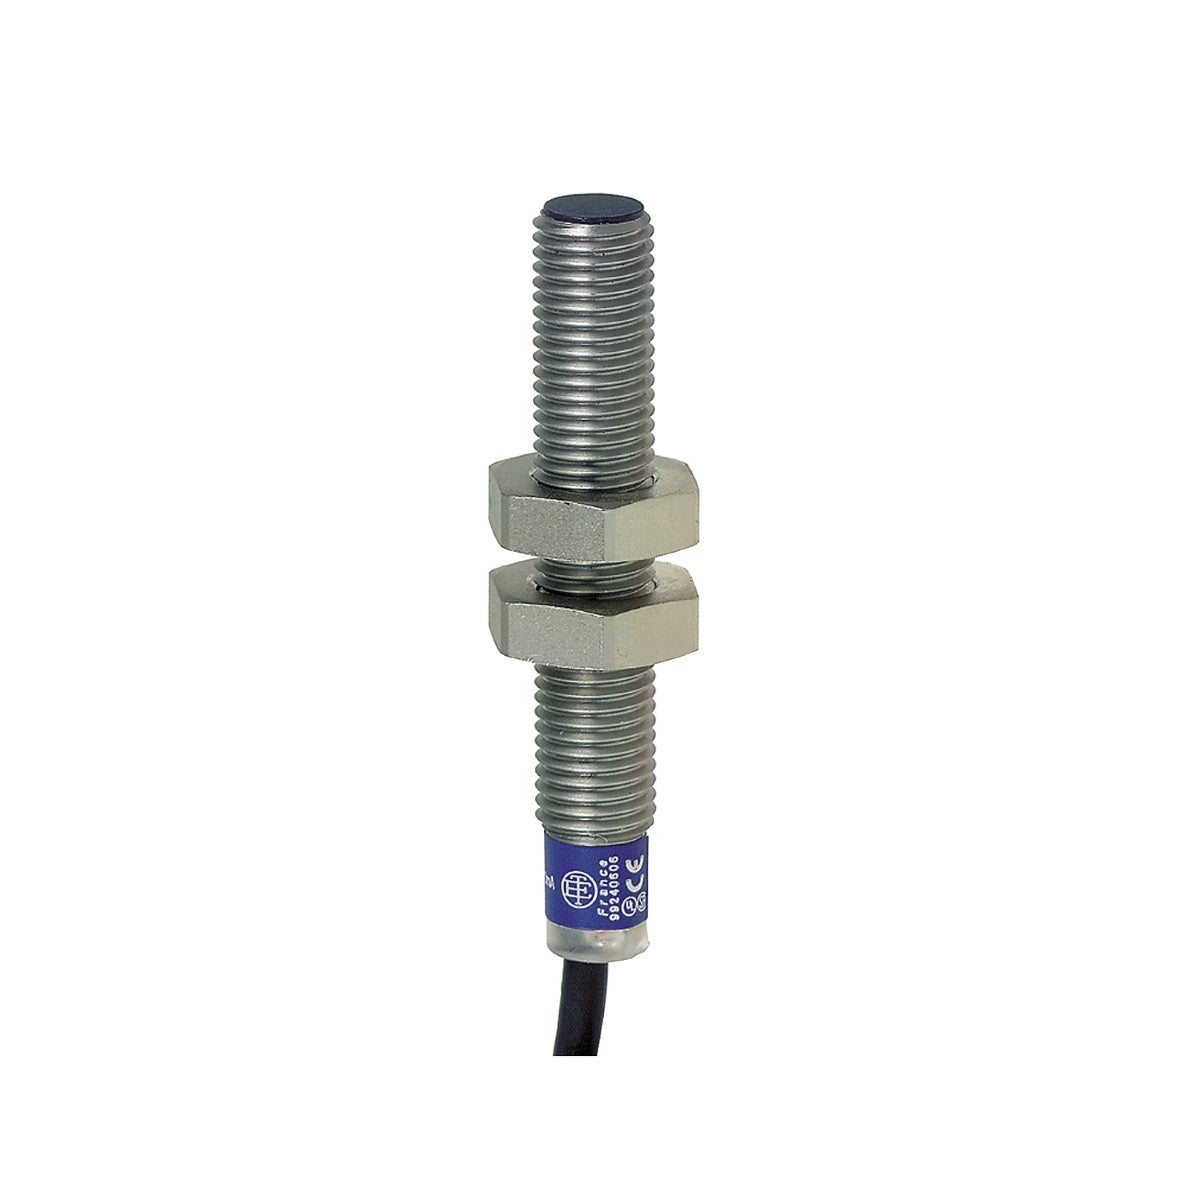 inductive sensor XS1 M8, L50mm, stainless, Sn1.5mm, 12..24VDC, cable 2 m